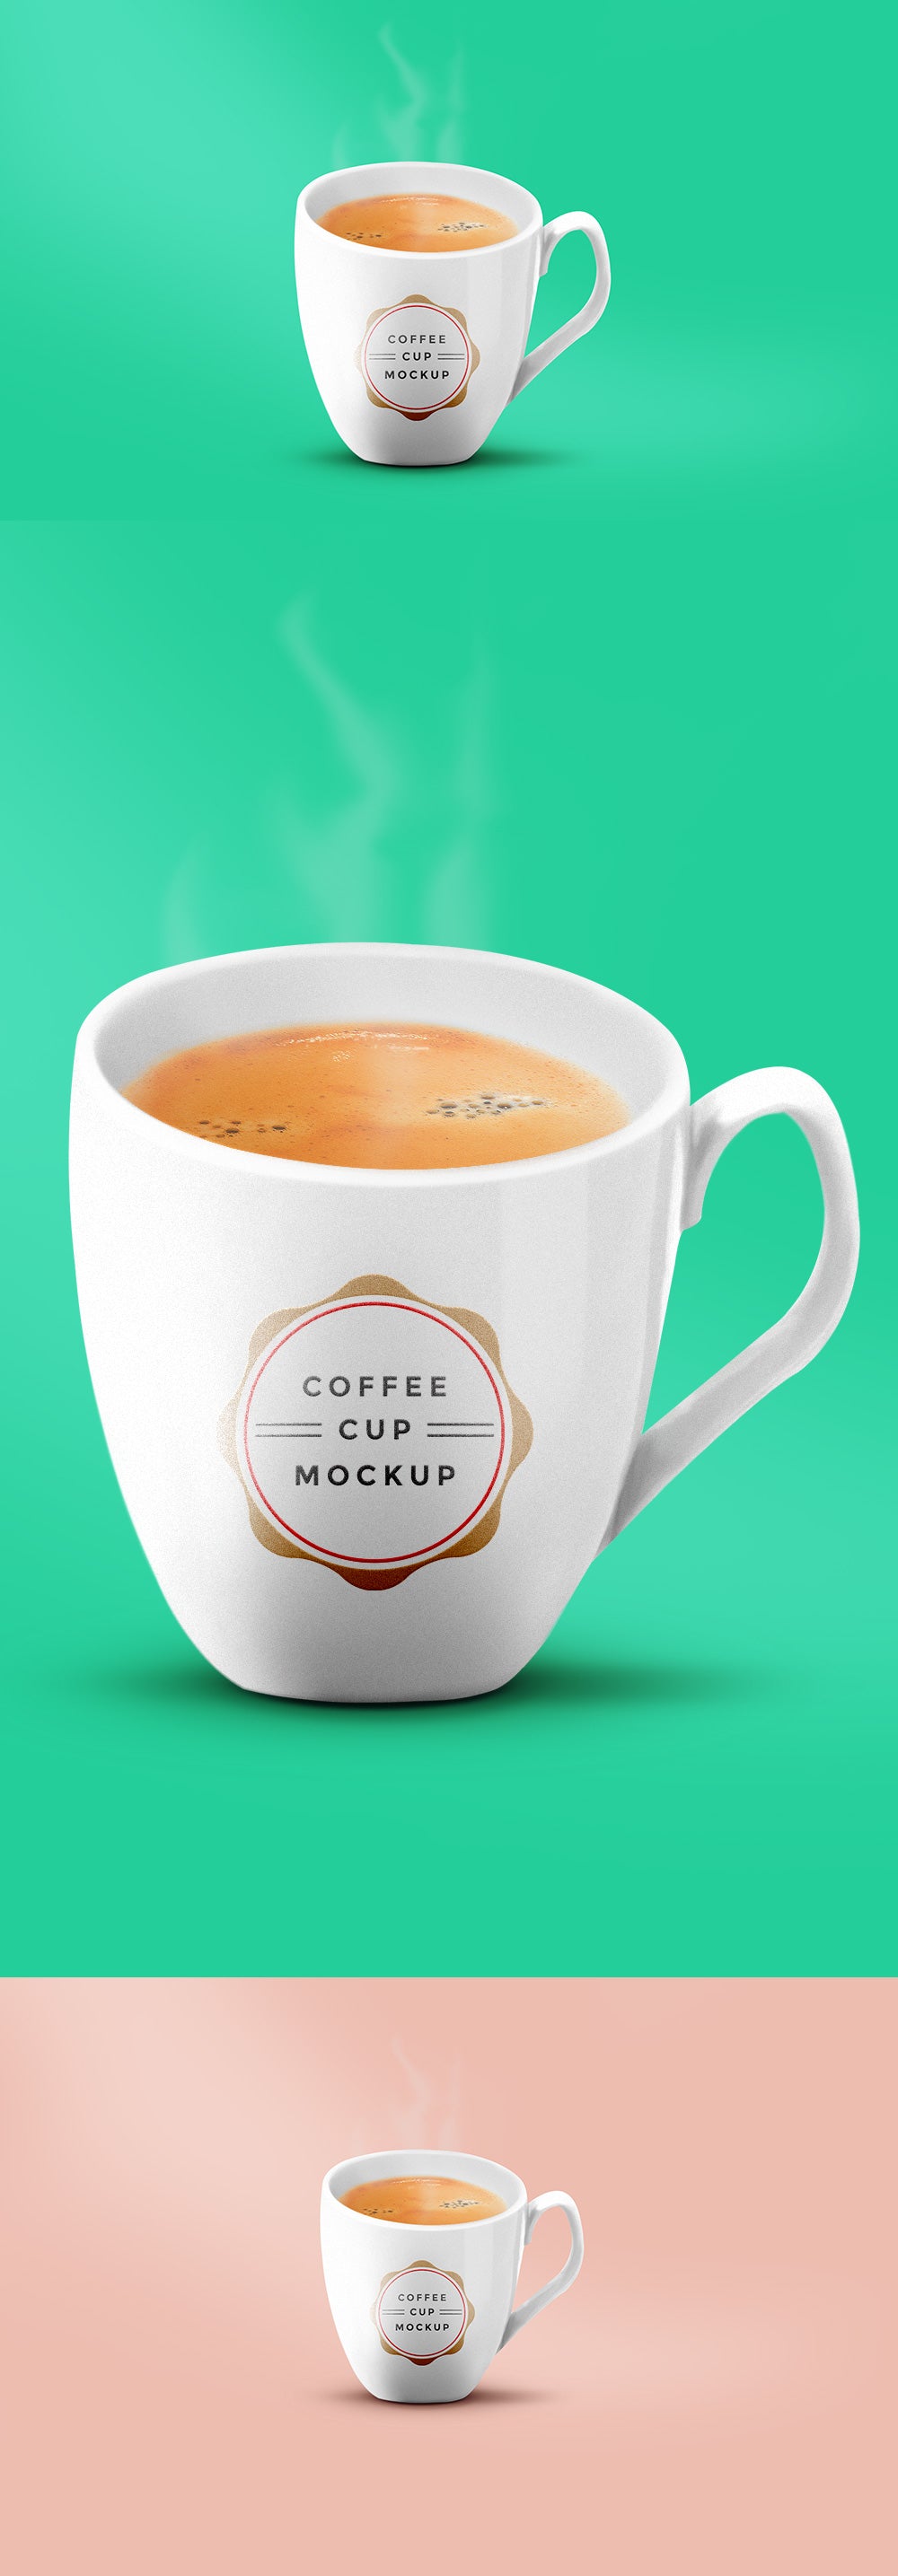 Free Hot Coffee in a Cup Mockup PSD